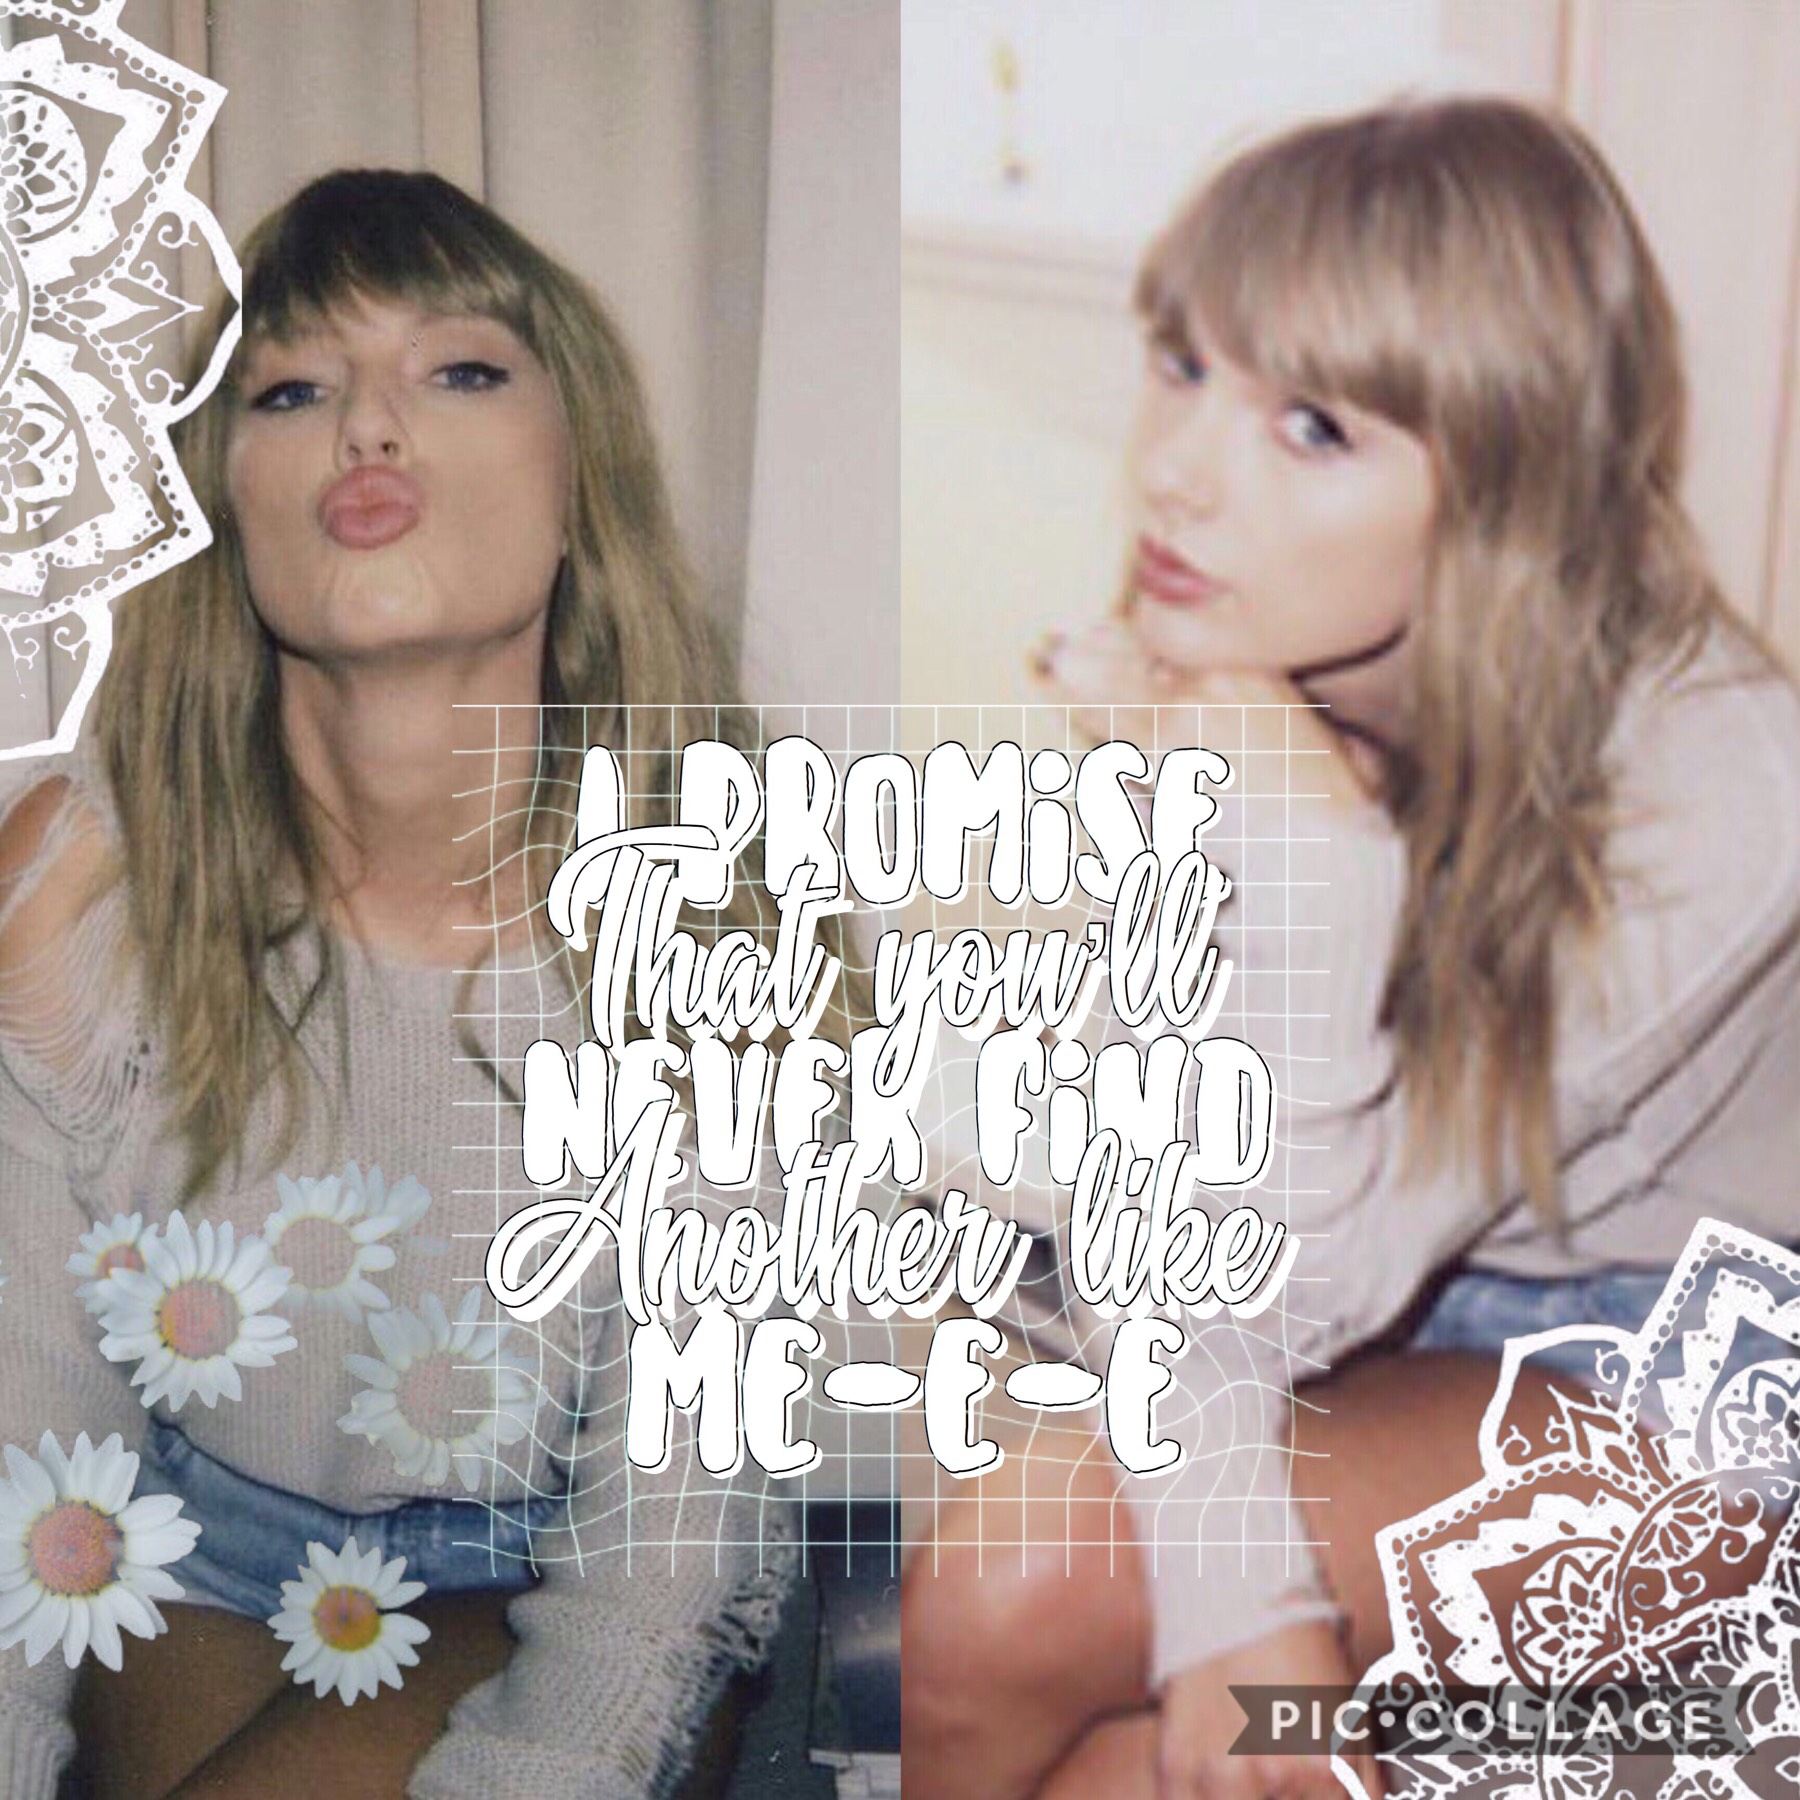 TAY TAYYYY LIKE YES ITS BEEN AWHILE SINCE I POSTED HER QOTD-ARE YOU A SWIFTIE? AOTD- THE WOMAN WRITES SONGS ABOUT HER EXS OFC IM A FAN LIKE YES I LOVE THE SONG ME!